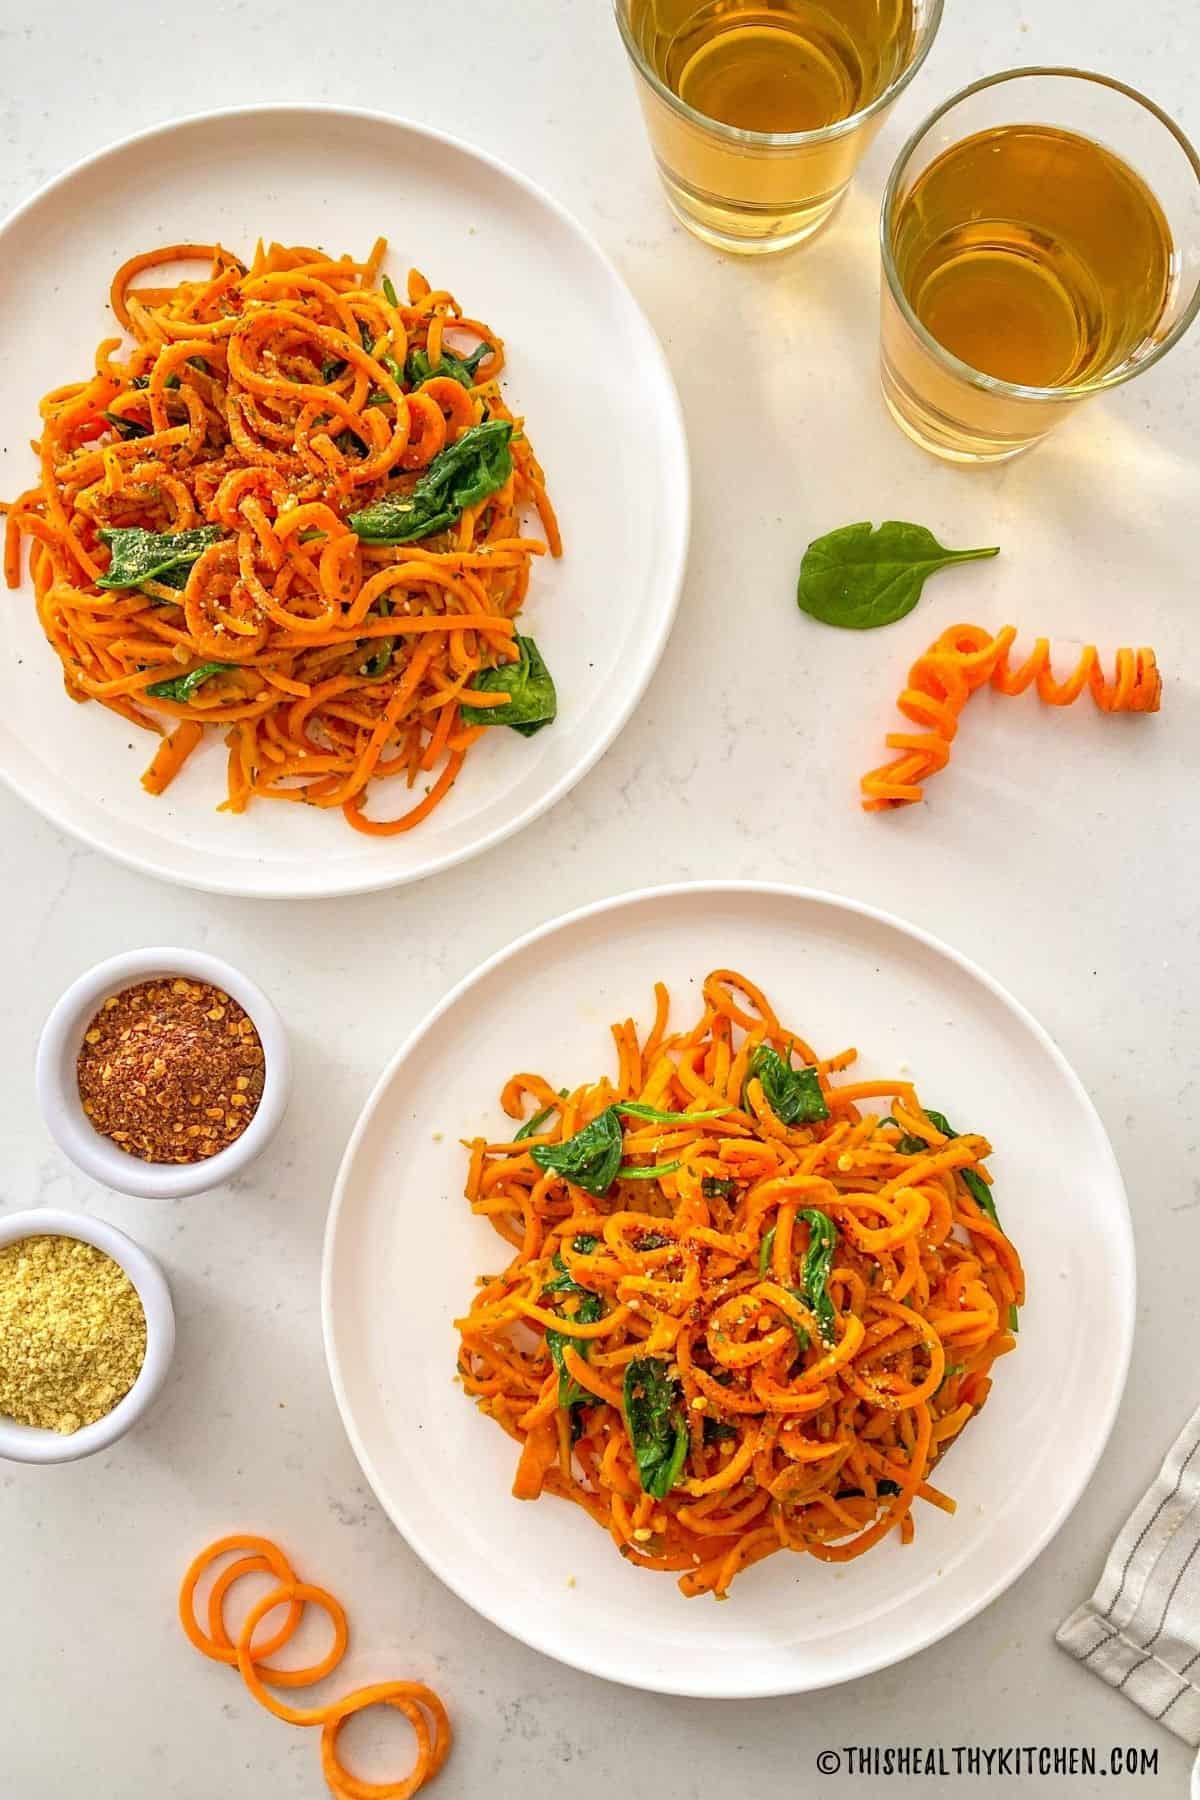 Two plates of sweet potato spaghetti with two glasses of wine and small bowl of chili flakes.